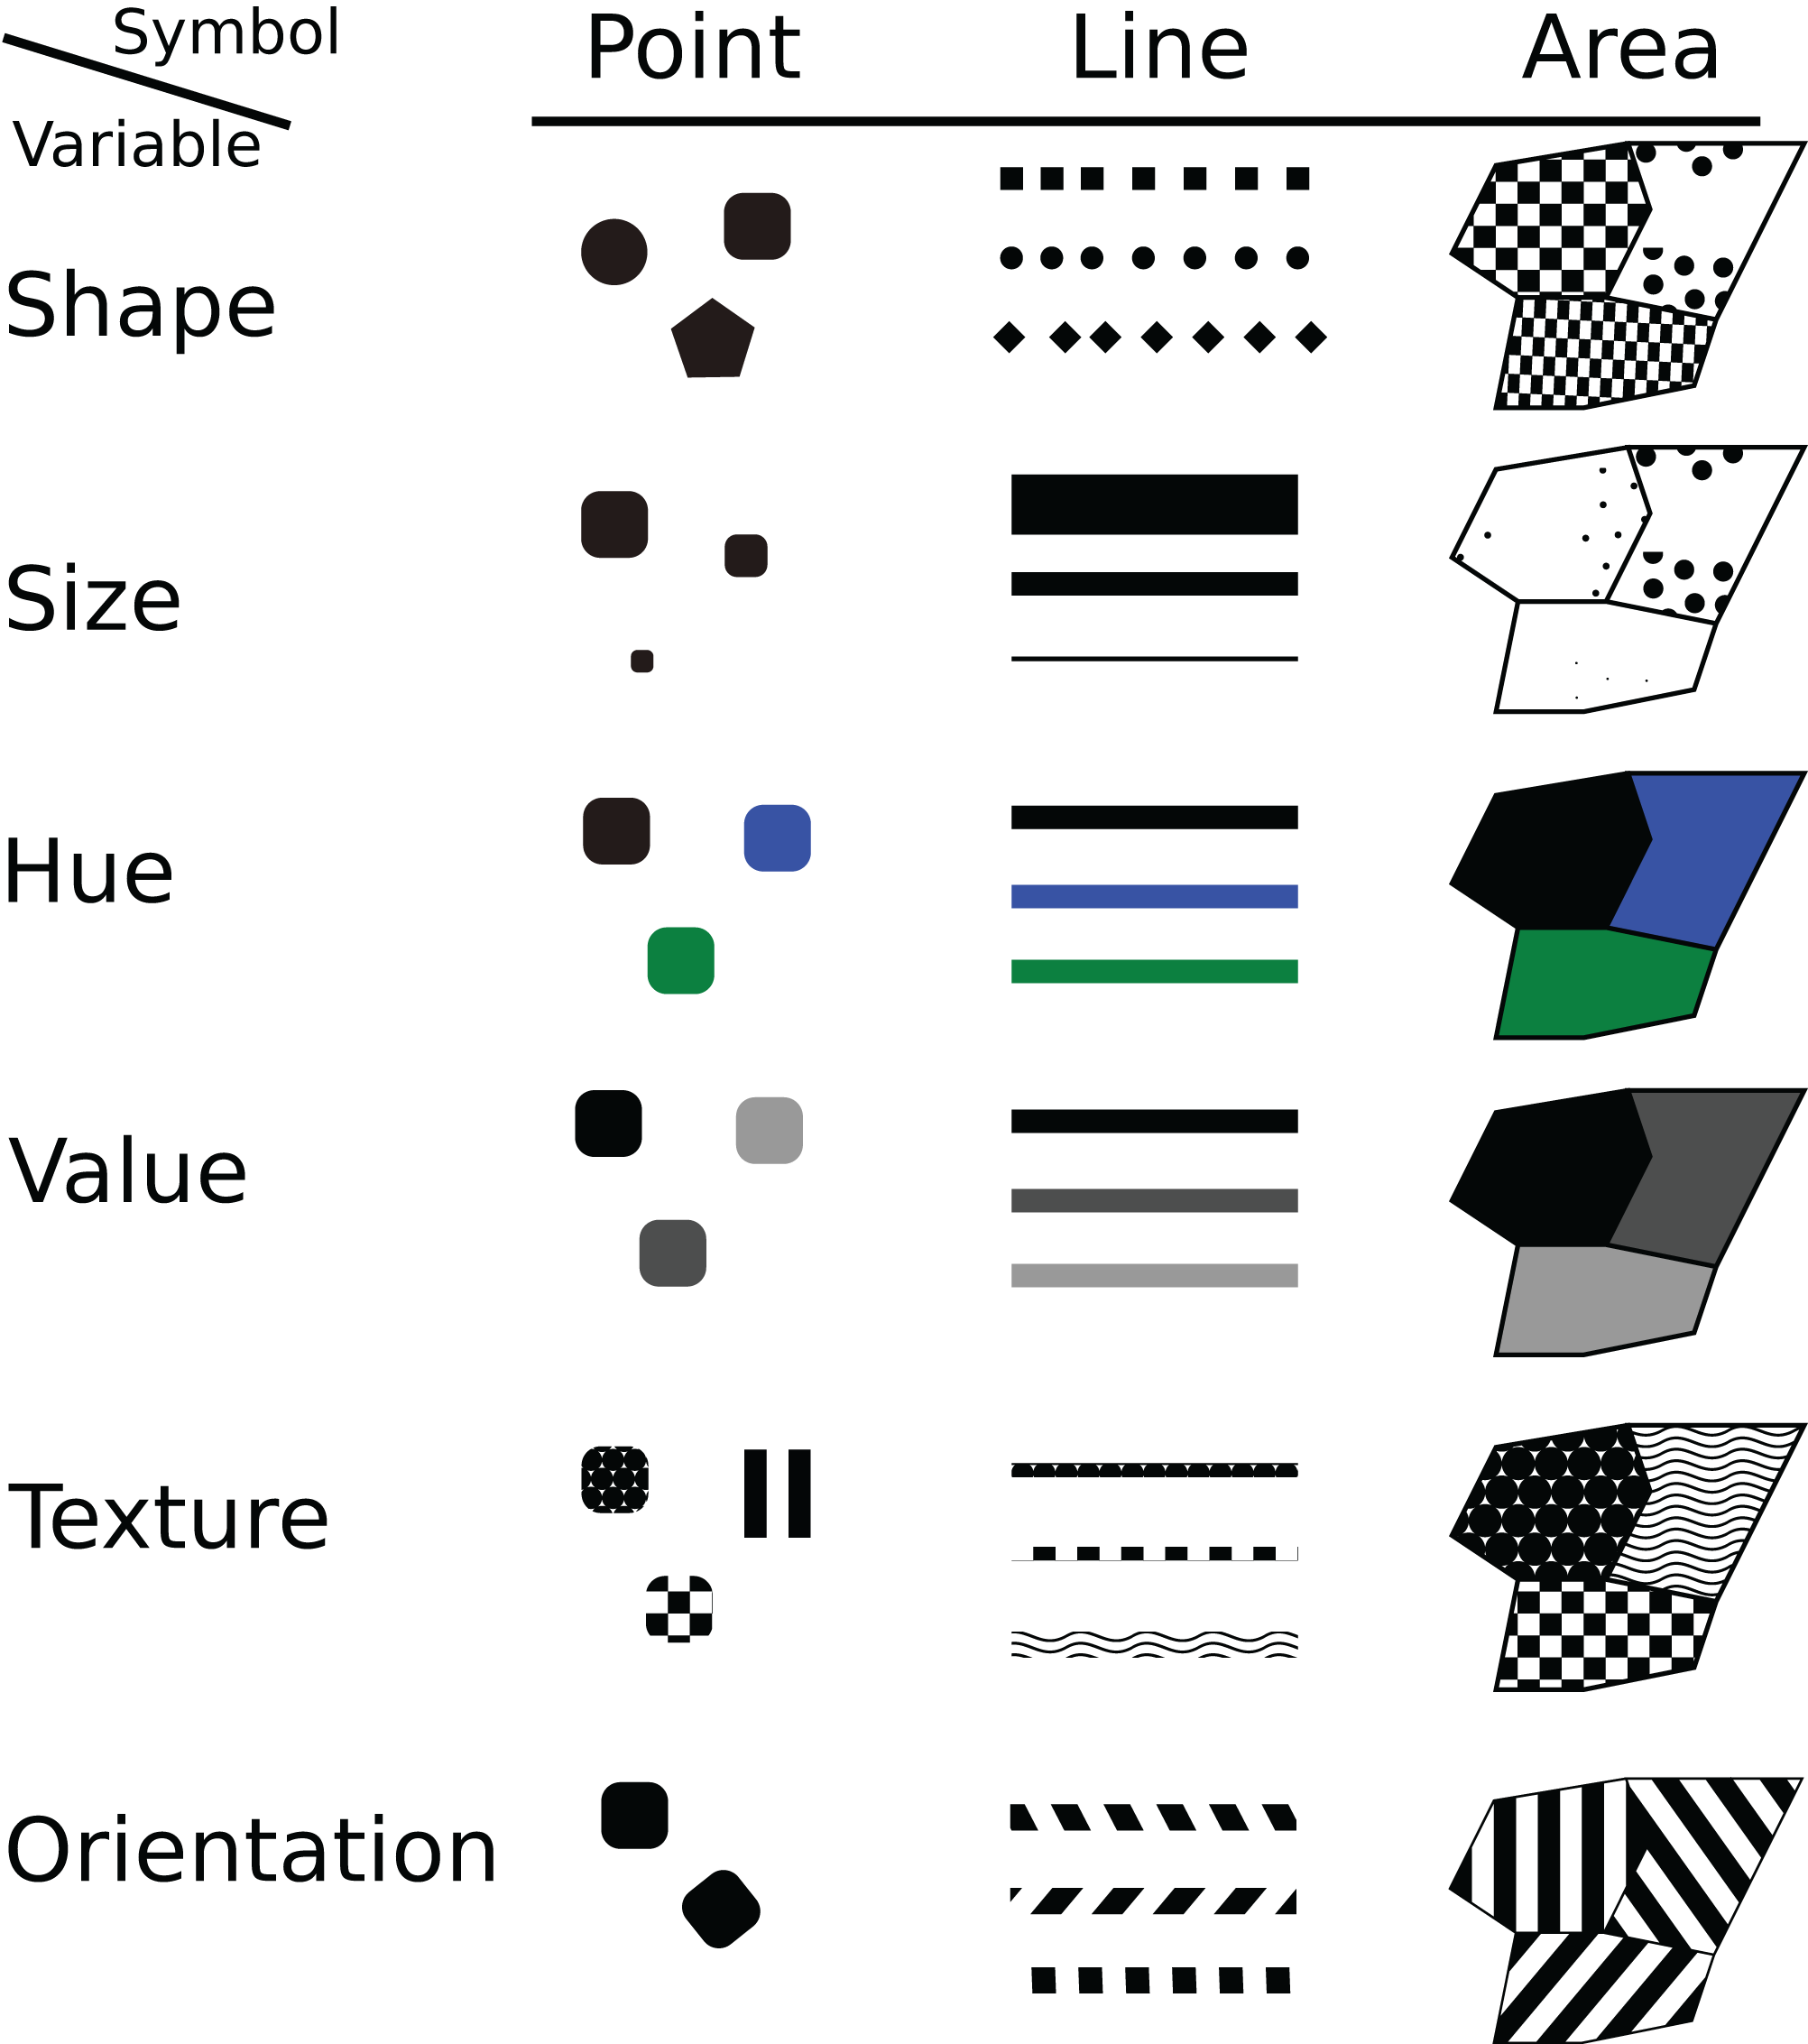 Figure 2 from Functional Efficiency, Effectiveness, and Expressivity of  Bertin's Visual Variable Colour Hue in Thematic Map Design